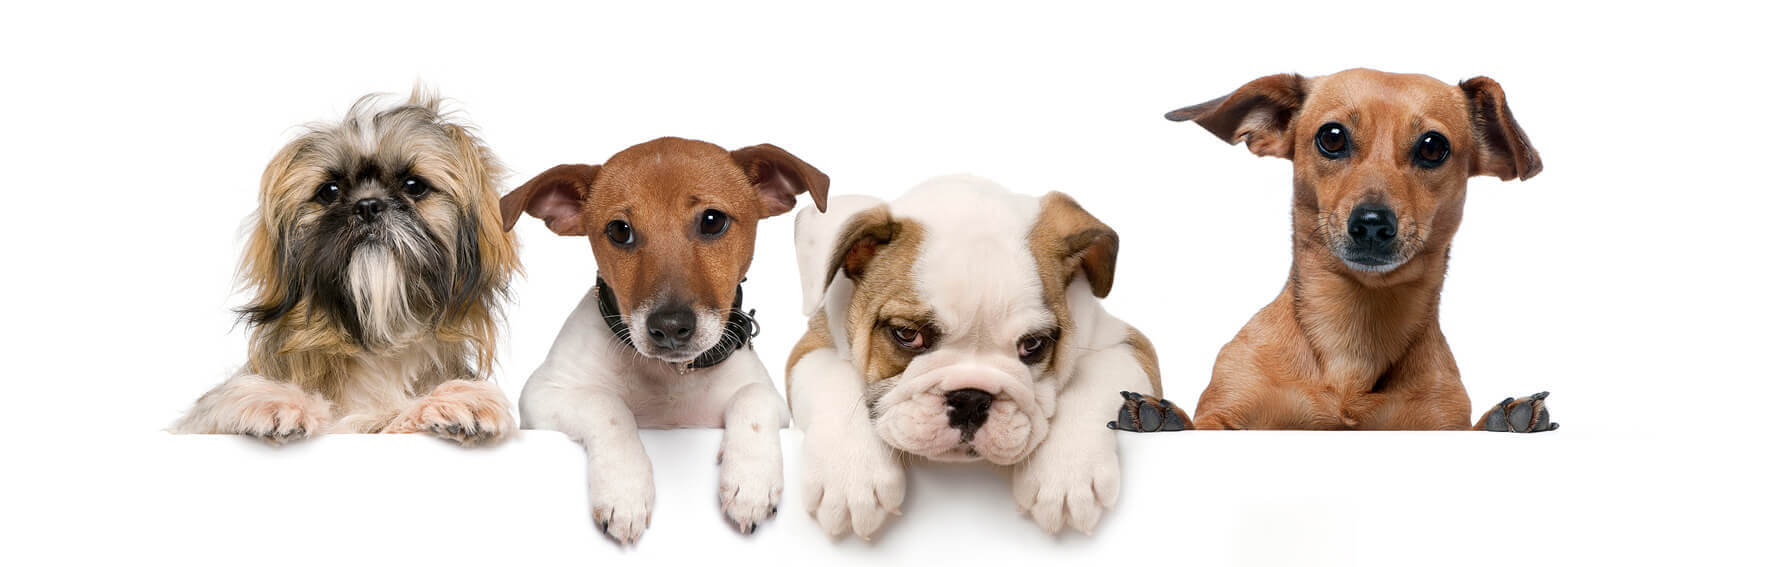 four puppies on white background